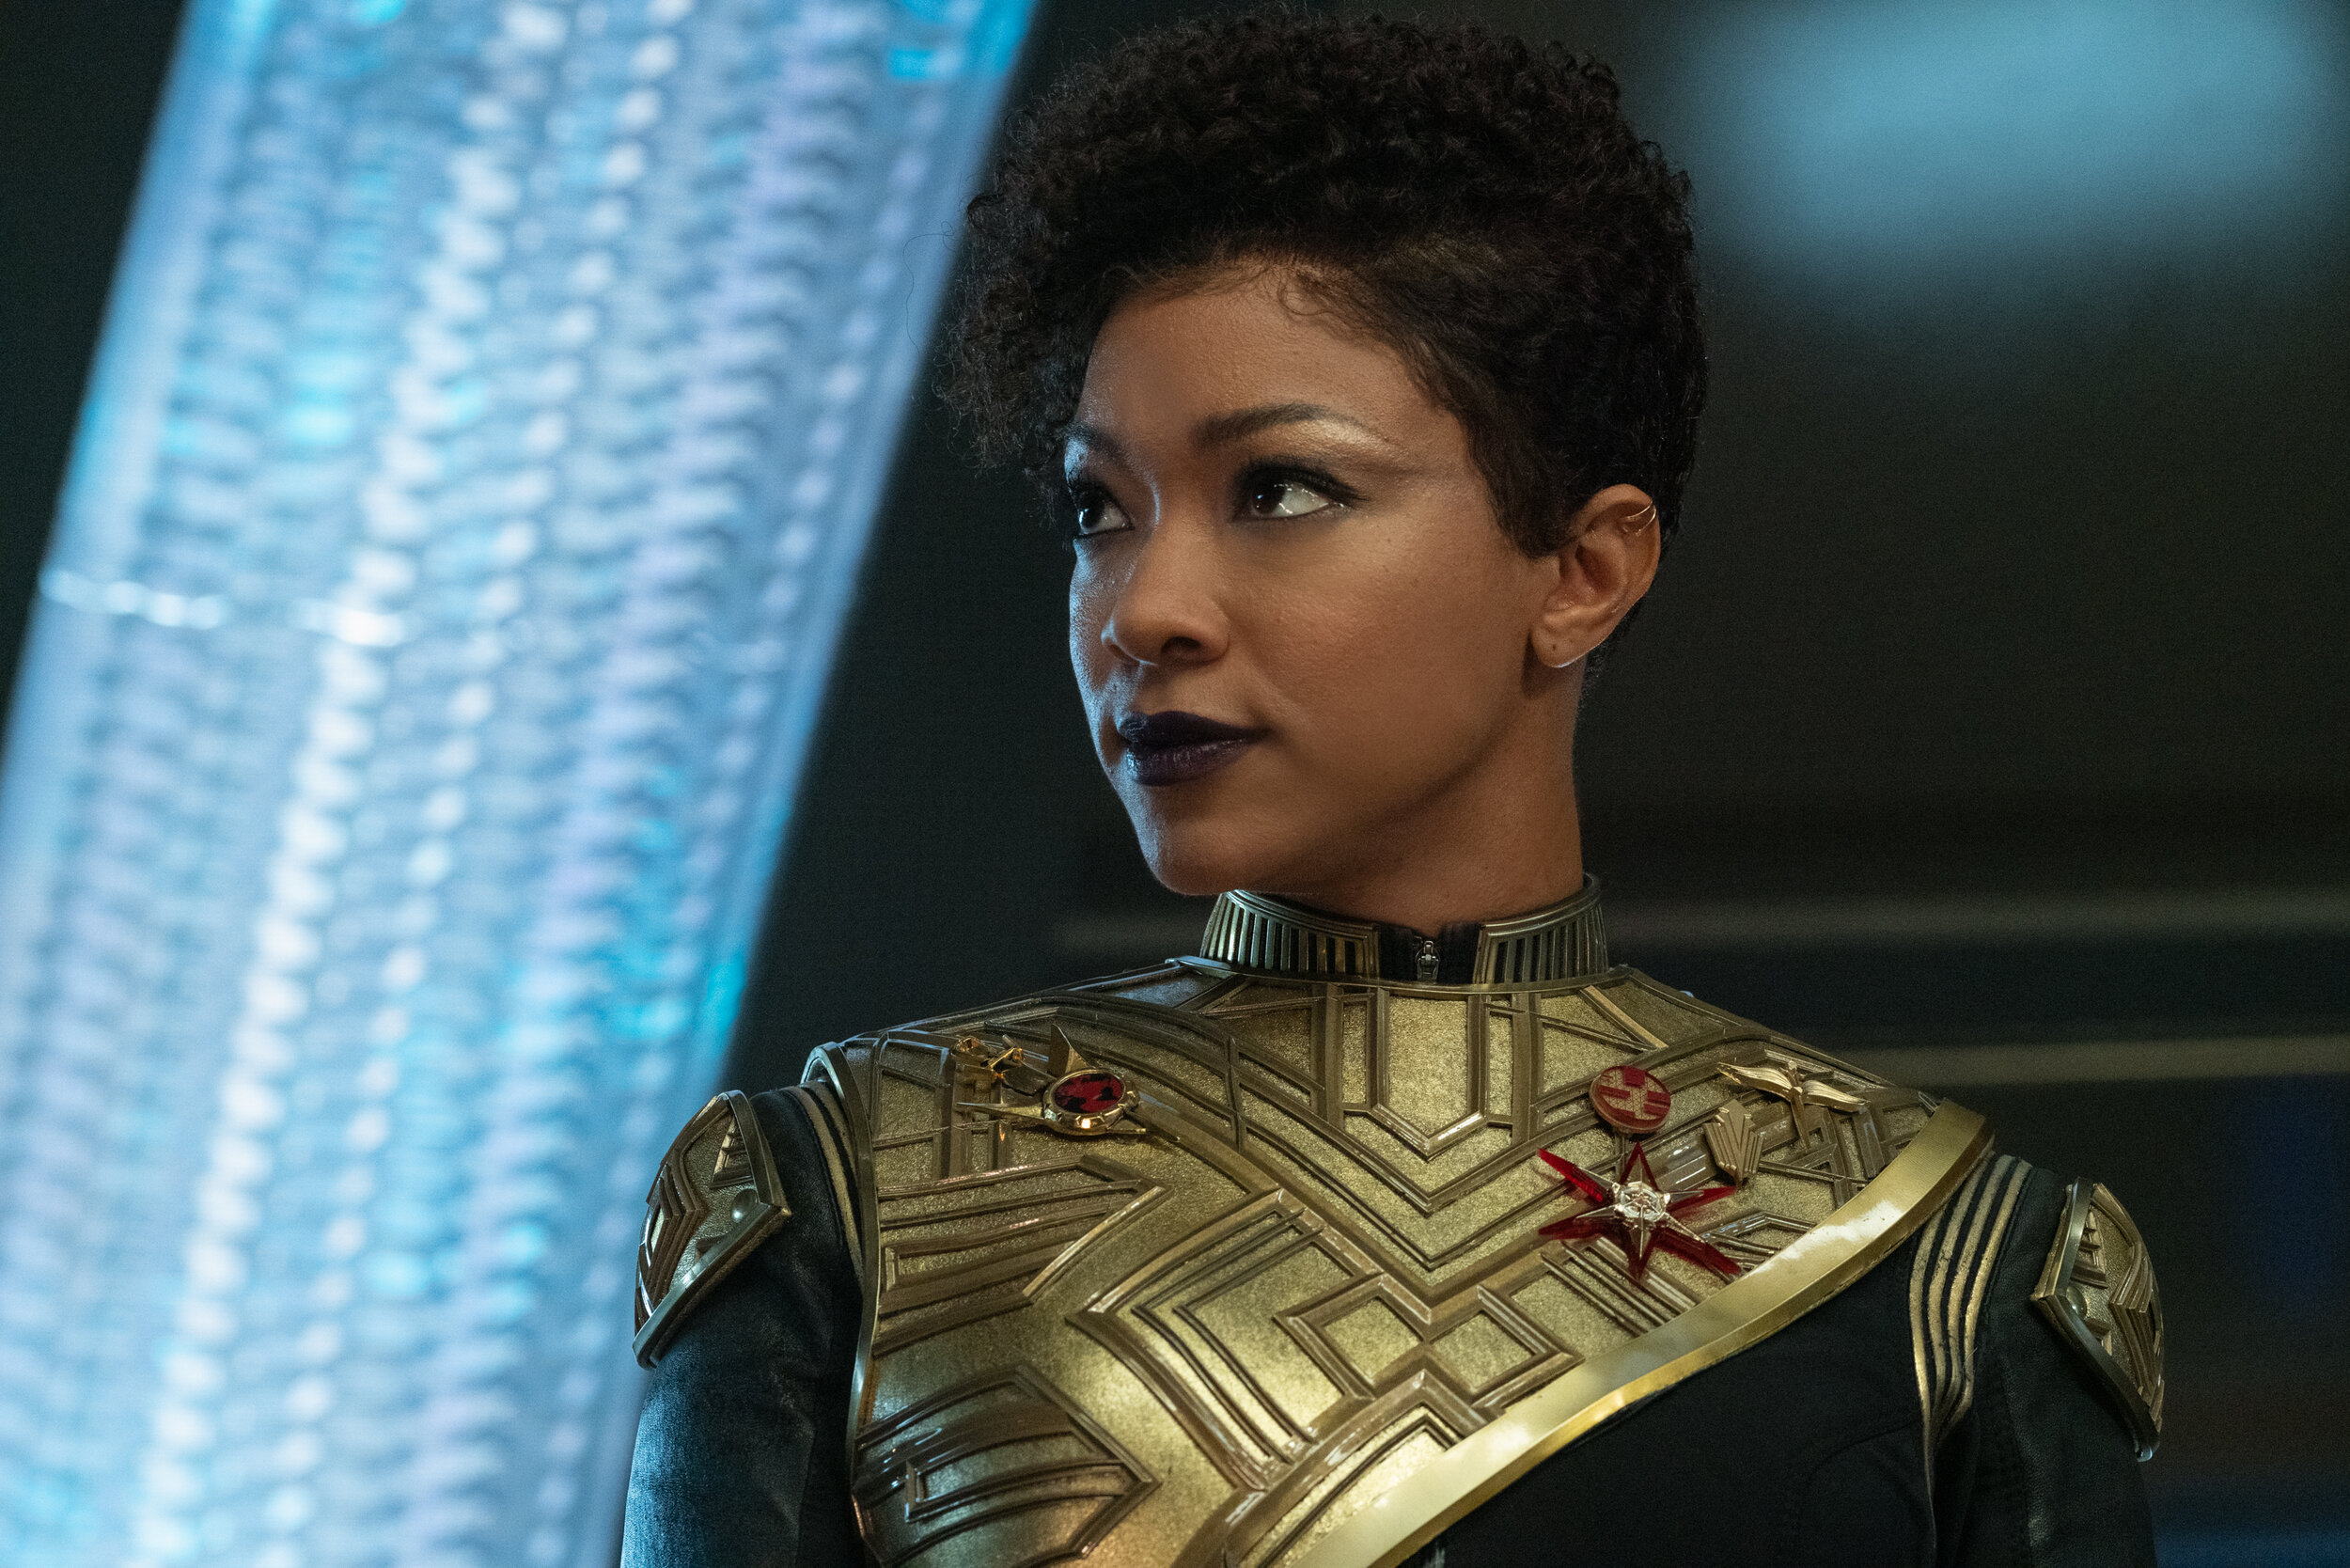   "Terra Firma, Part 2" -- Ep#310 -- Pictured: Sonequa Martin-Green as Commander Burnham of the CBS All Access series STAR TREK: DISCOVERY. Photo Cr: Michael Gibson/CBS ©2020 CBS Interactive, Inc. All Rights Reserved.  